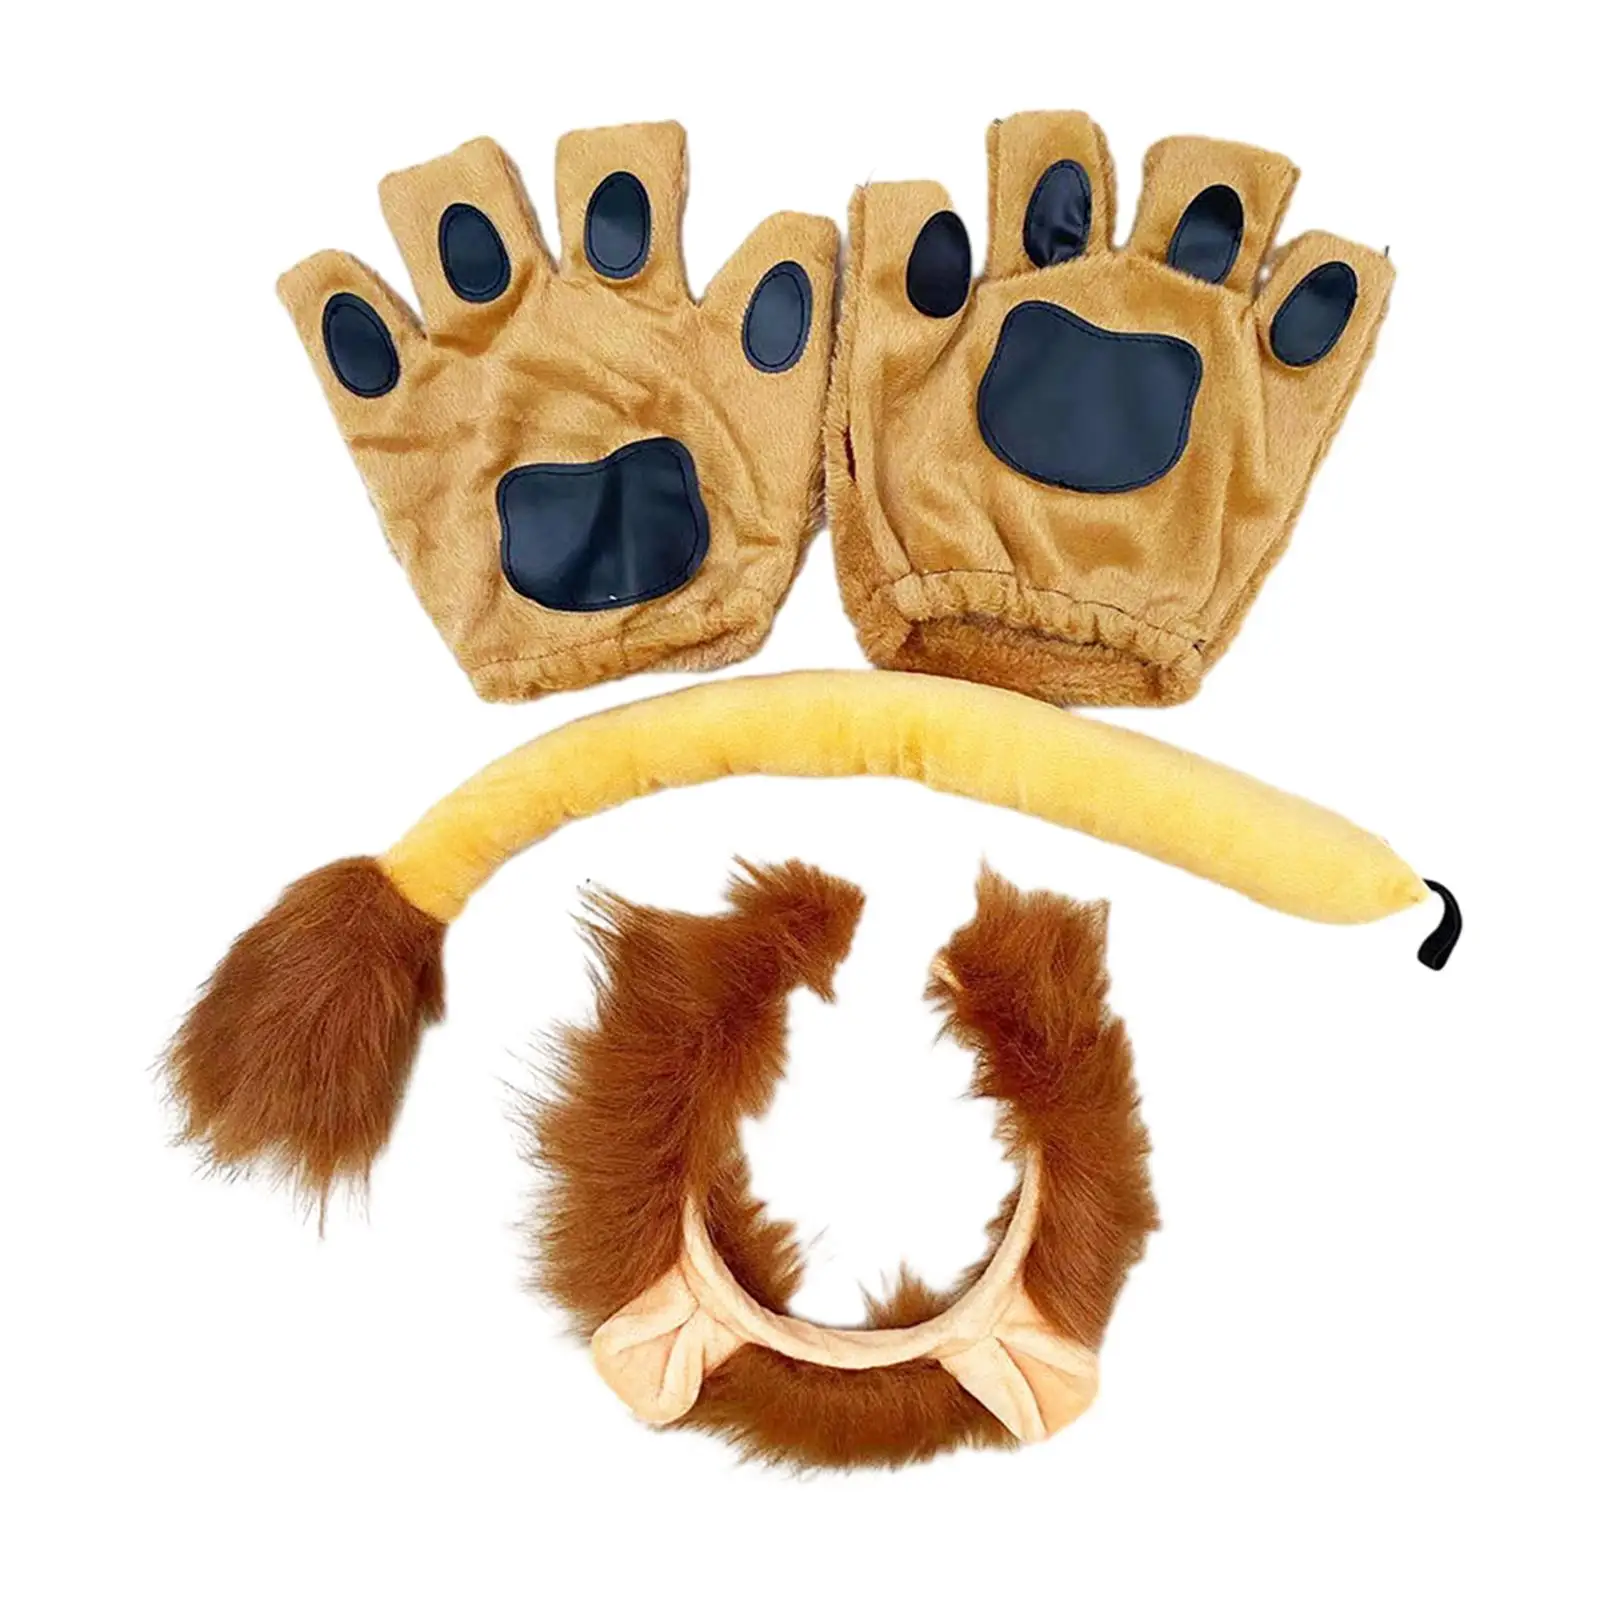 Lion Ears and Tail with Gloves for Kids Headwear Plush Lion Ears Hair Clip for Festival Performance Party Birthday Fancy Dress